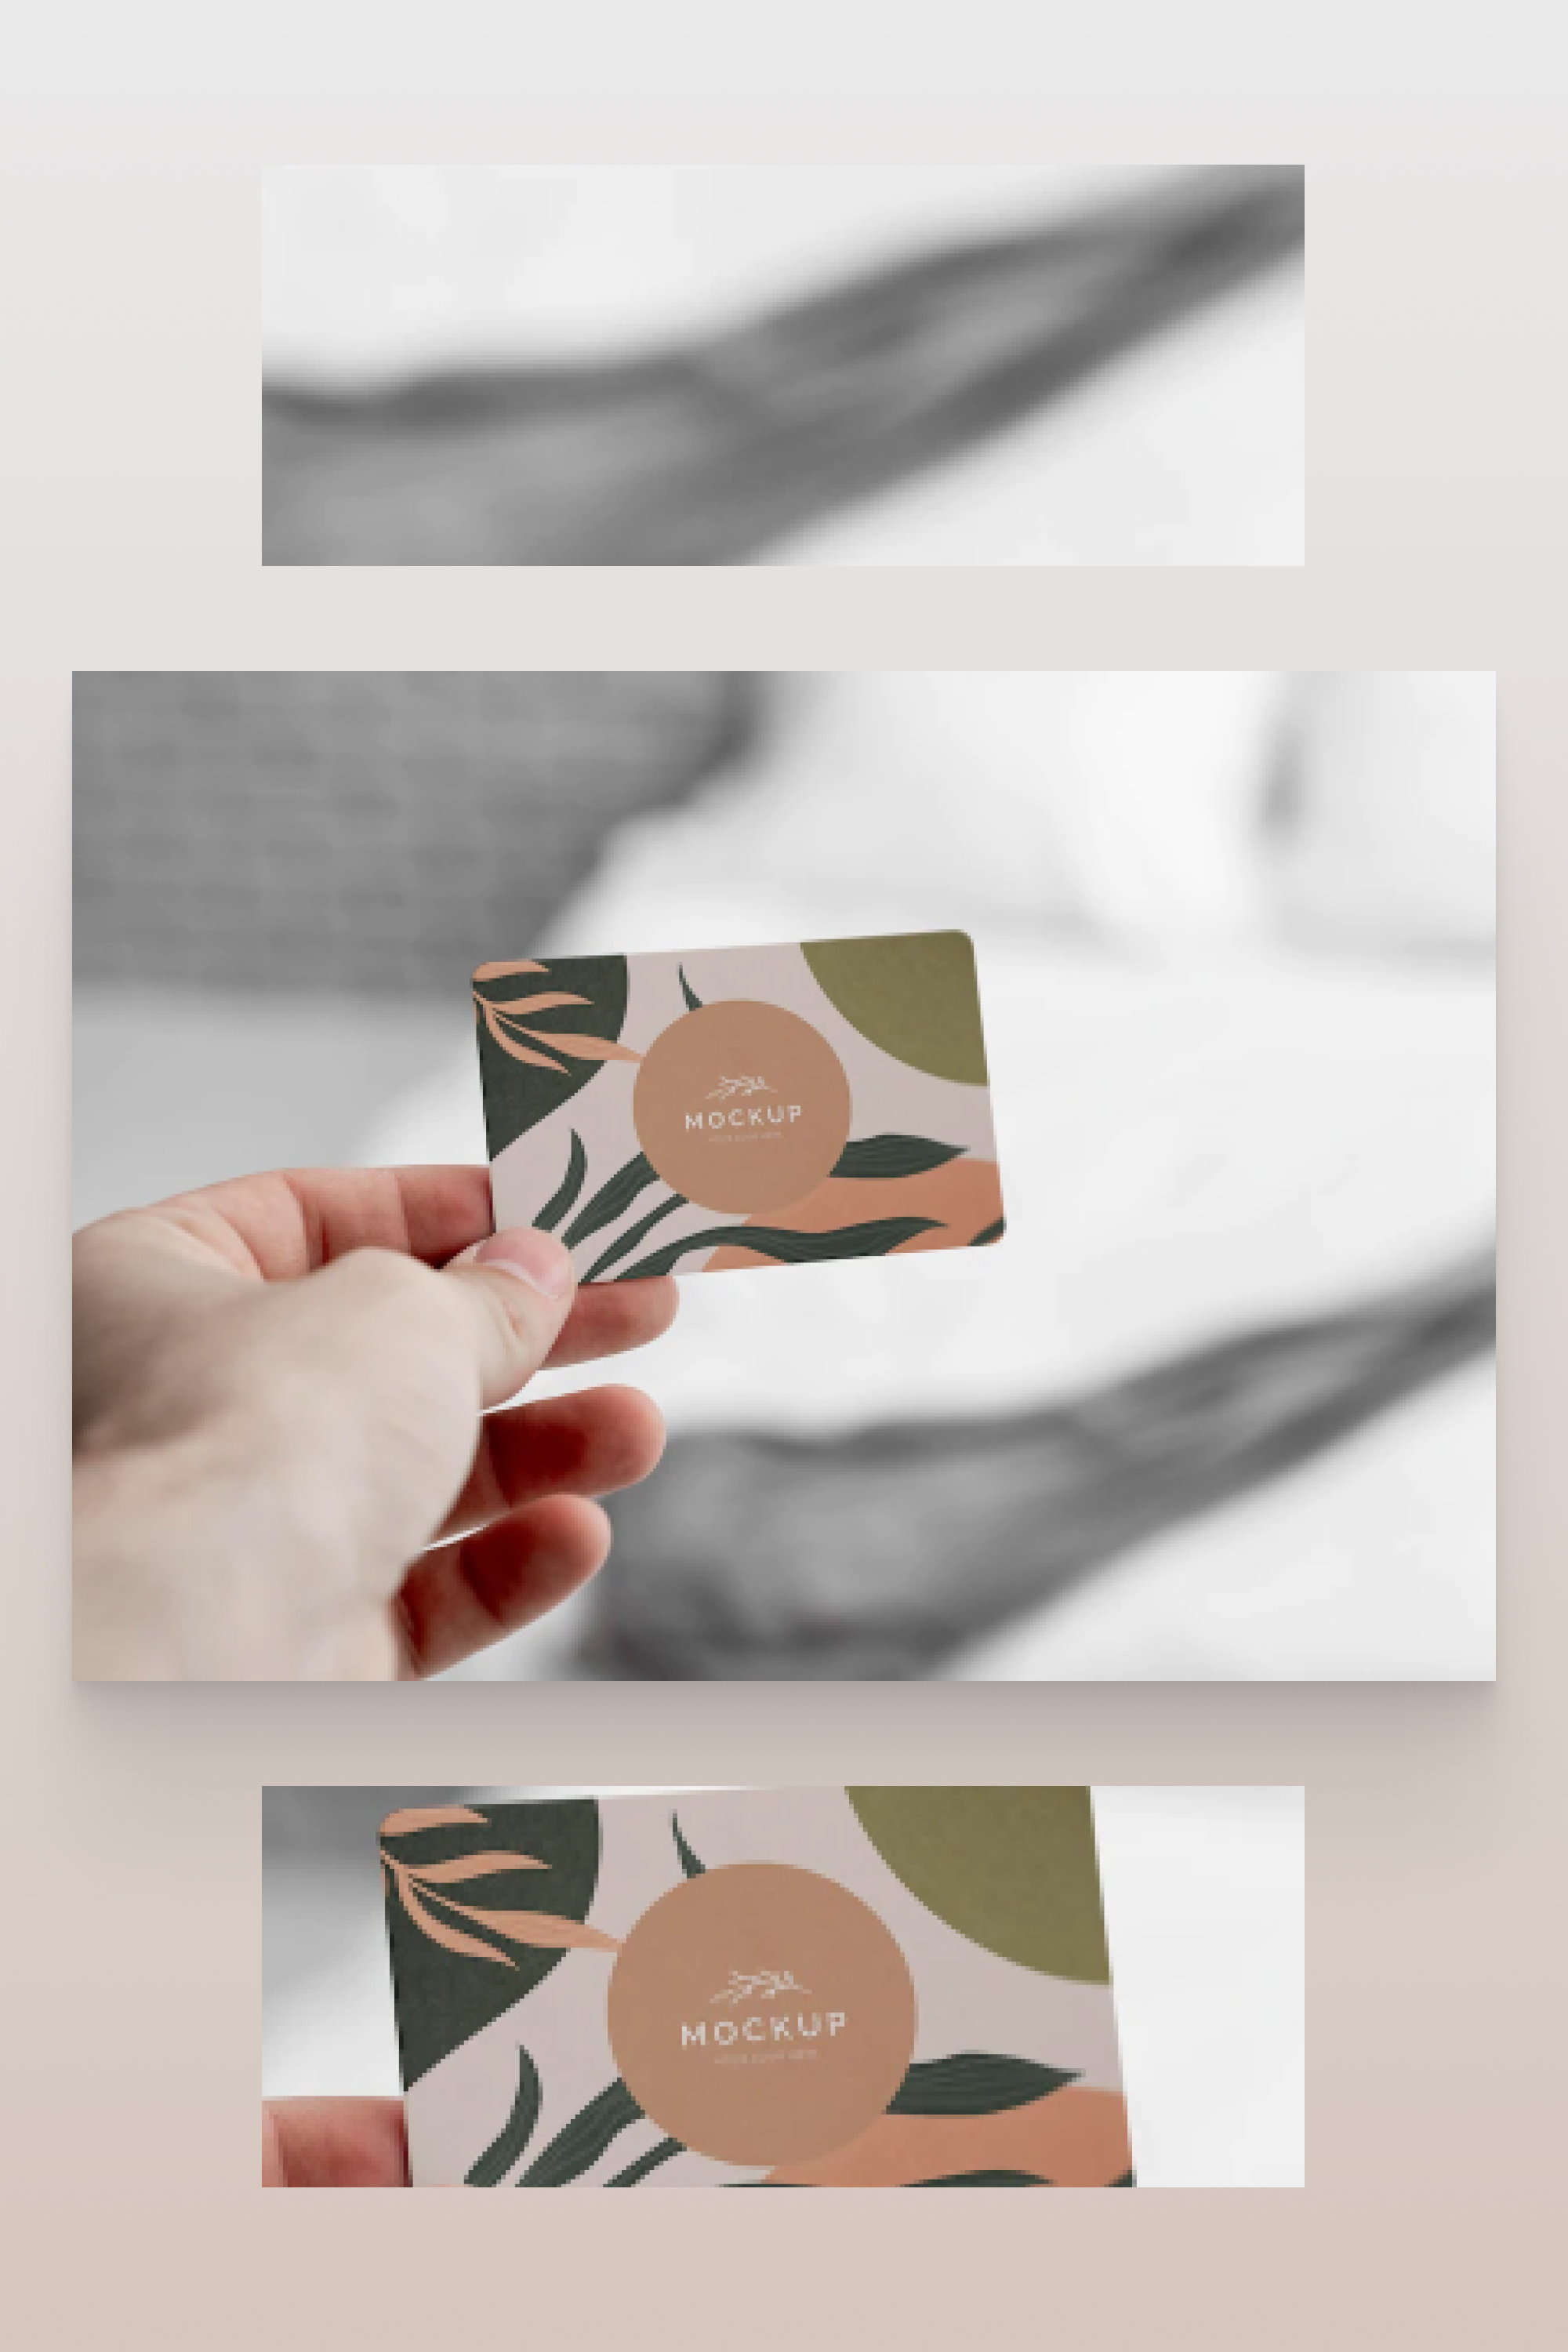 Color business card in hand on white and gray background.